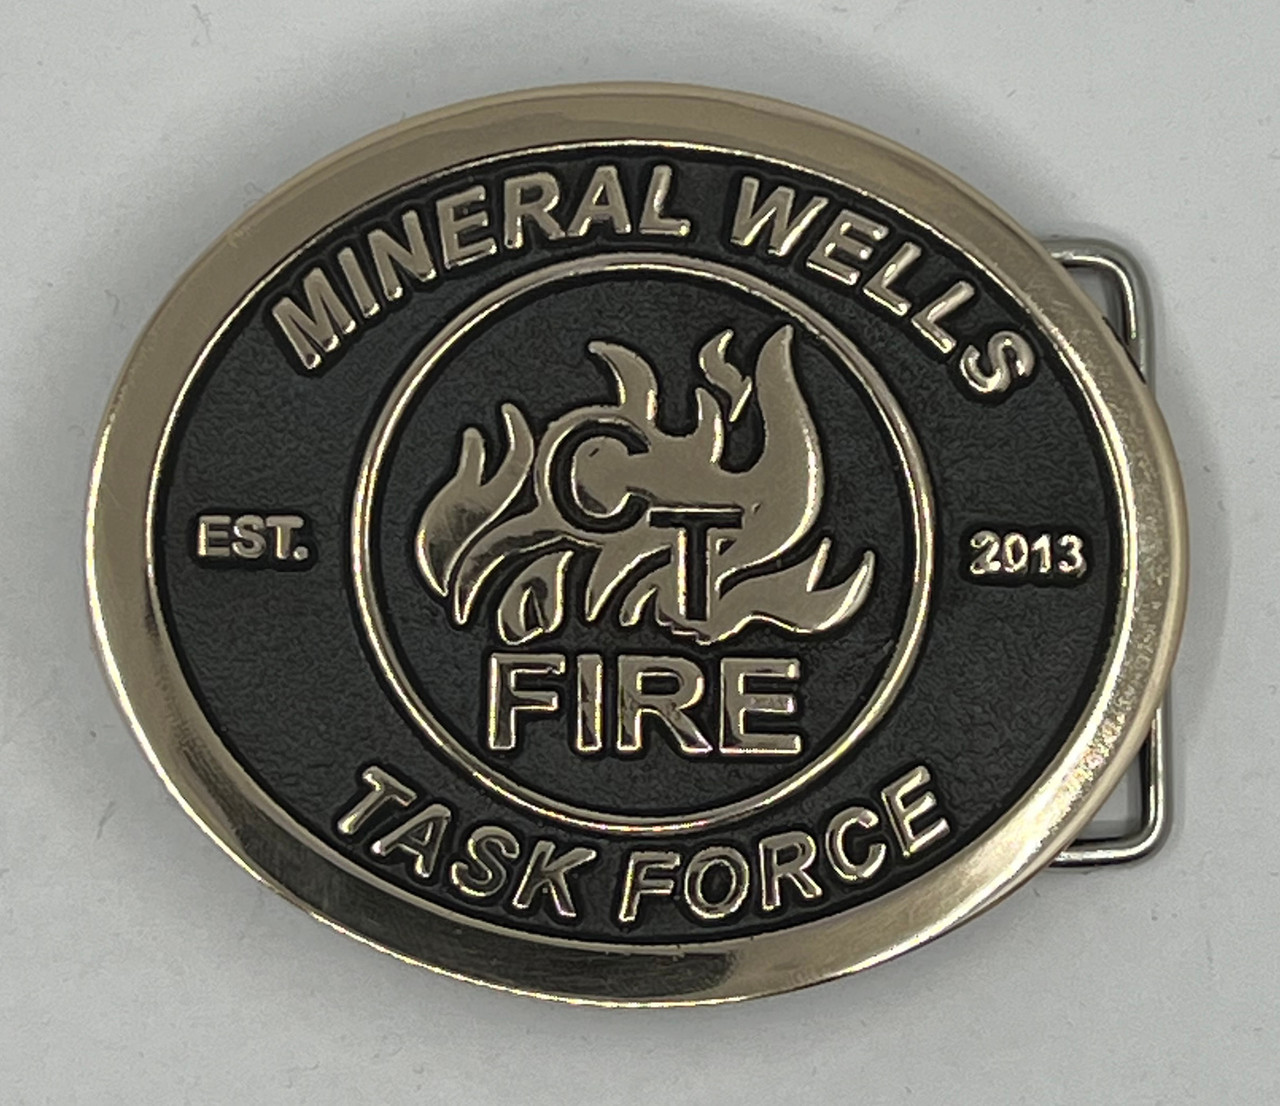 Mineral Wells Task Force CT Fire Est 2013 Buckle (RESTRICTED)